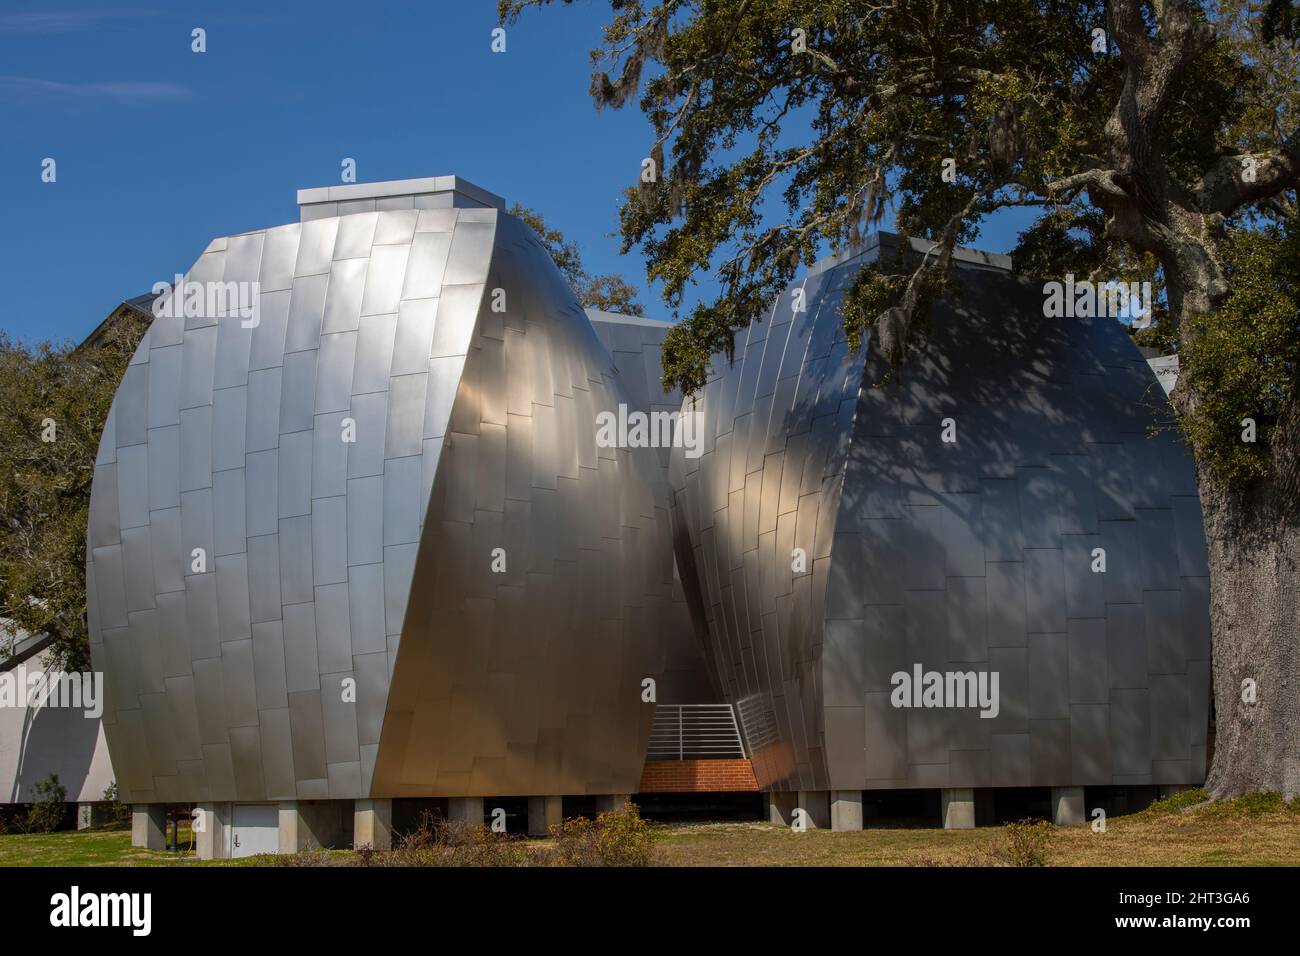 The Ohr-O'Keefe Museum Of Art  in Biloxi, MS designed by architect Frank Gehry. Stock Photo